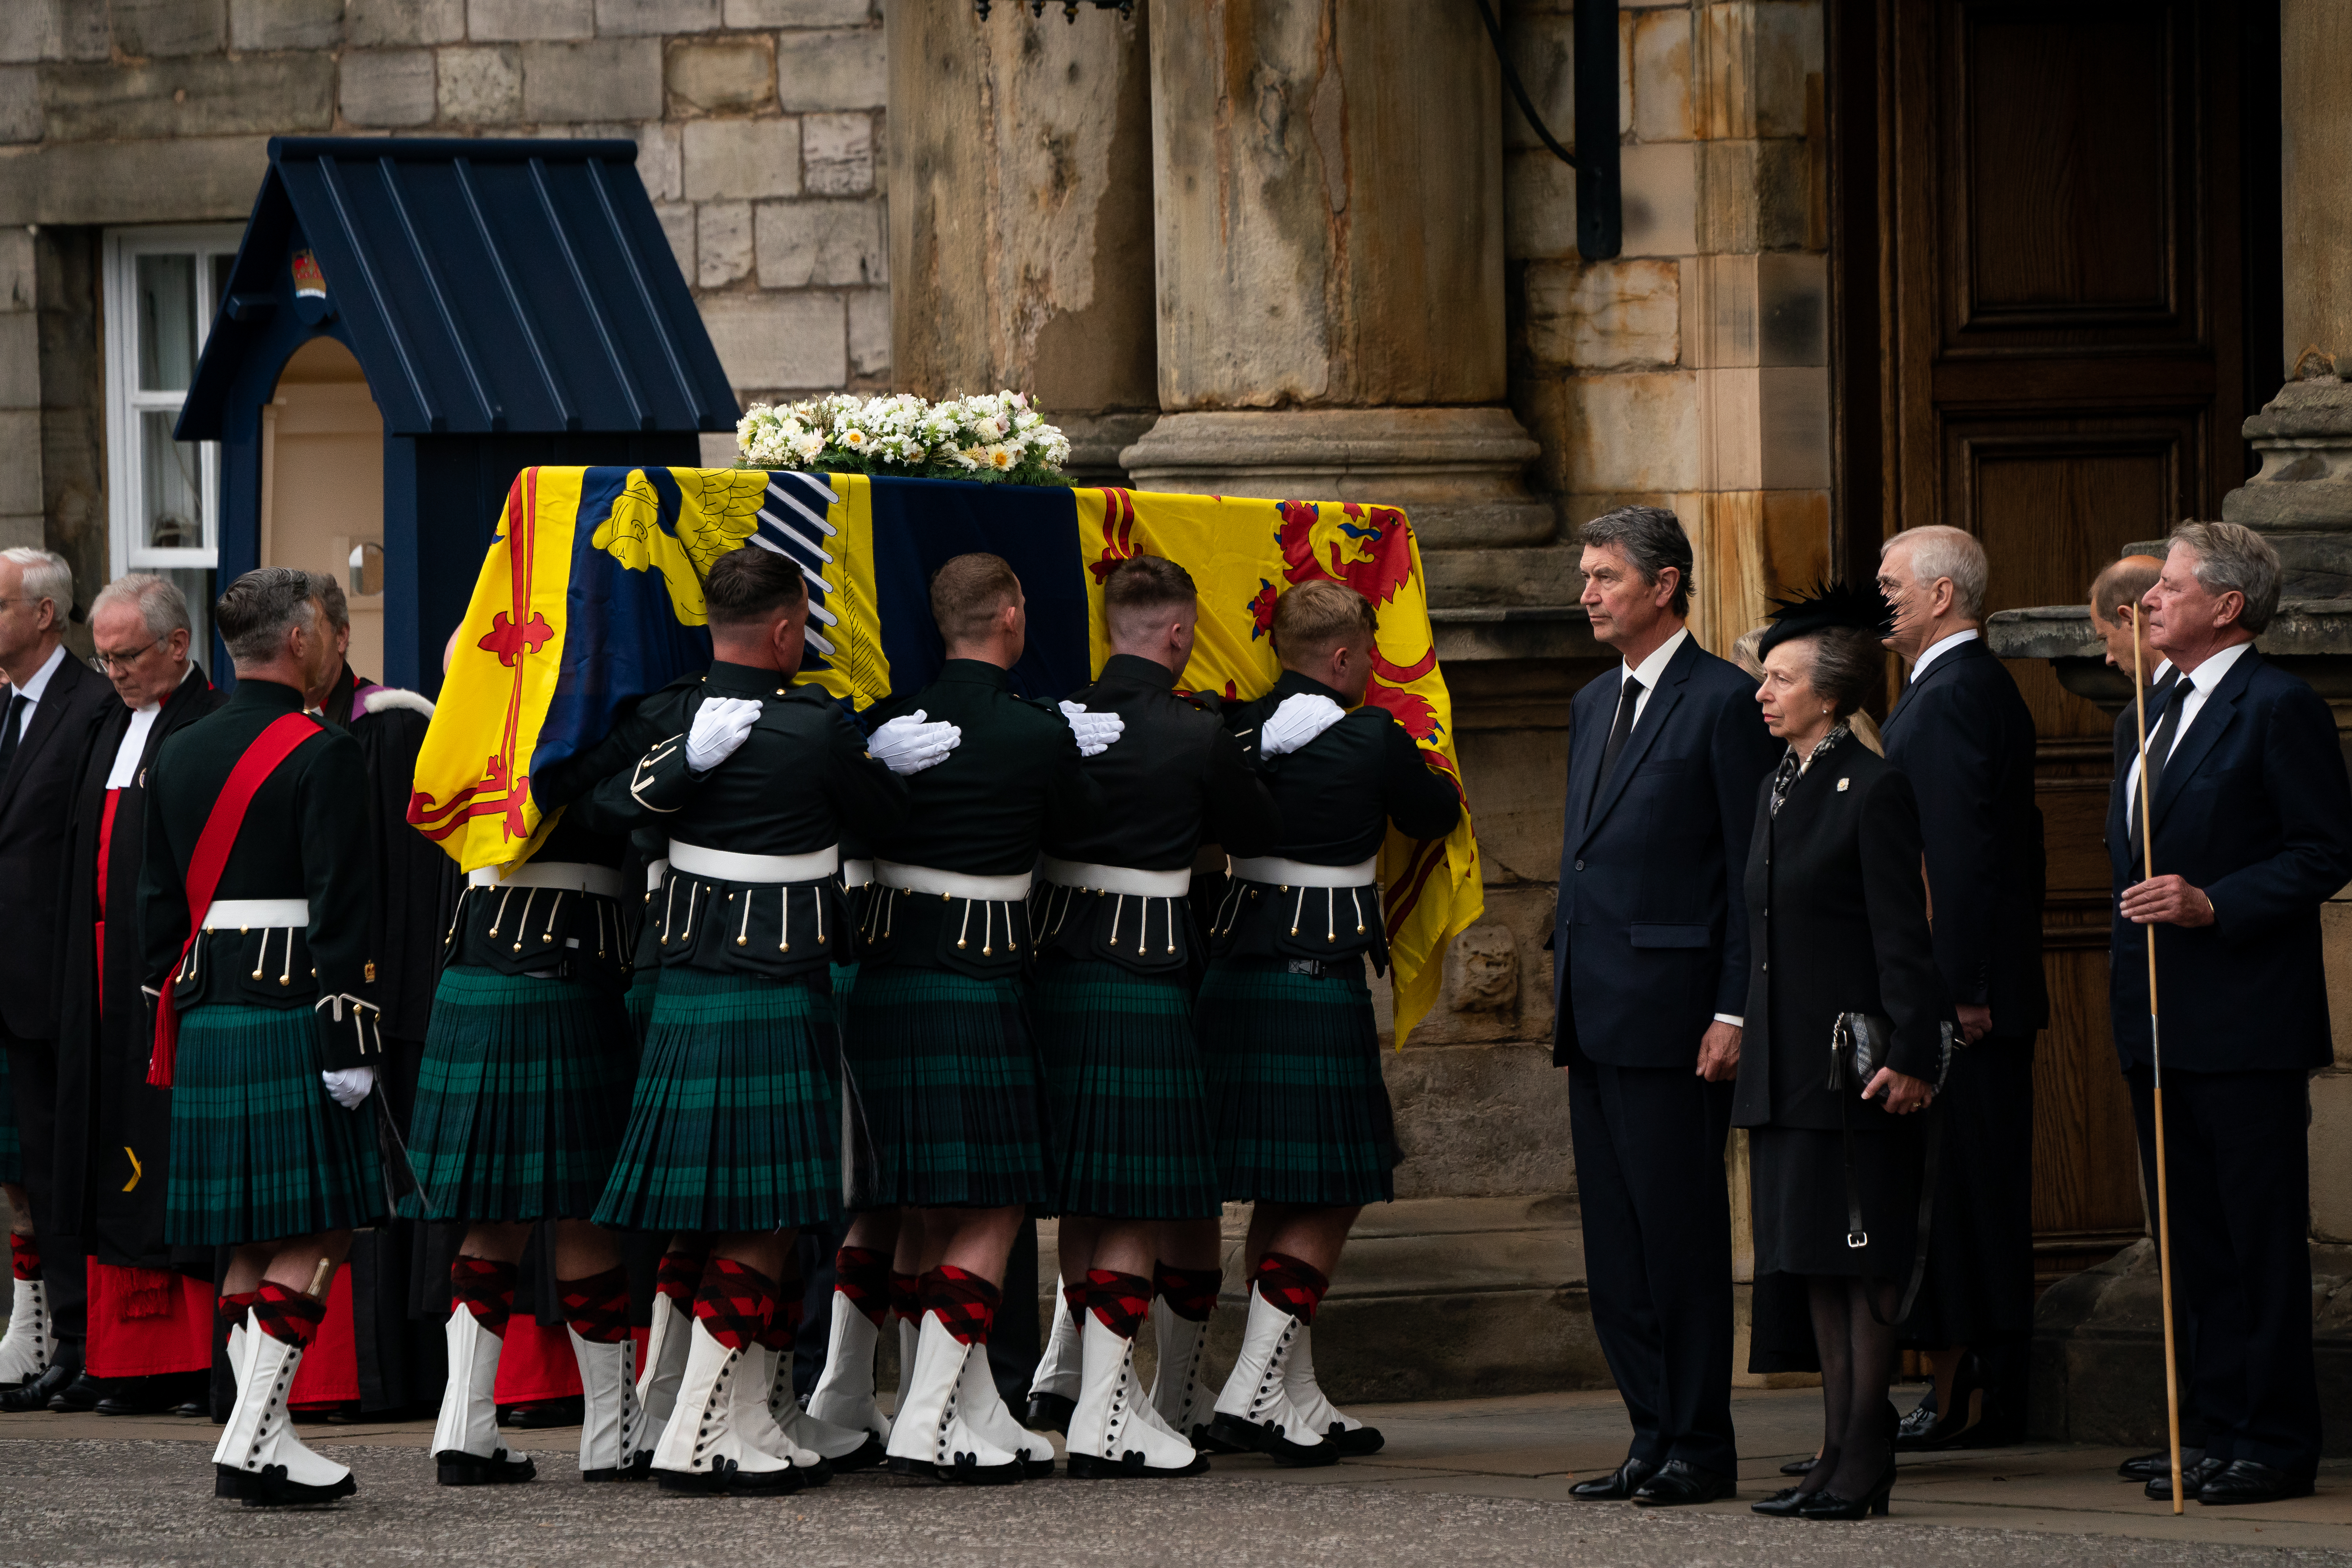 EDINBURGH, SCOTLAND - SEPTEMBER 11:  Vice Admiral Timothy Laurence and Britain's Princess Anne, Princess Royal stand solemnly as the coffin of Queen Elizabeth II, draped with the Royal Standard of Scotland, completes its journey from Balmoral to the Palace of Holyroodhouse on September 11, 2022 in Edinburgh, United Kingdom. Elizabeth Alexandra Mary Windsor was born in Bruton Street, Mayfair, London on 21 April 1926. She married Prince Philip in 1947 and ascended the throne of the United Kingdom 